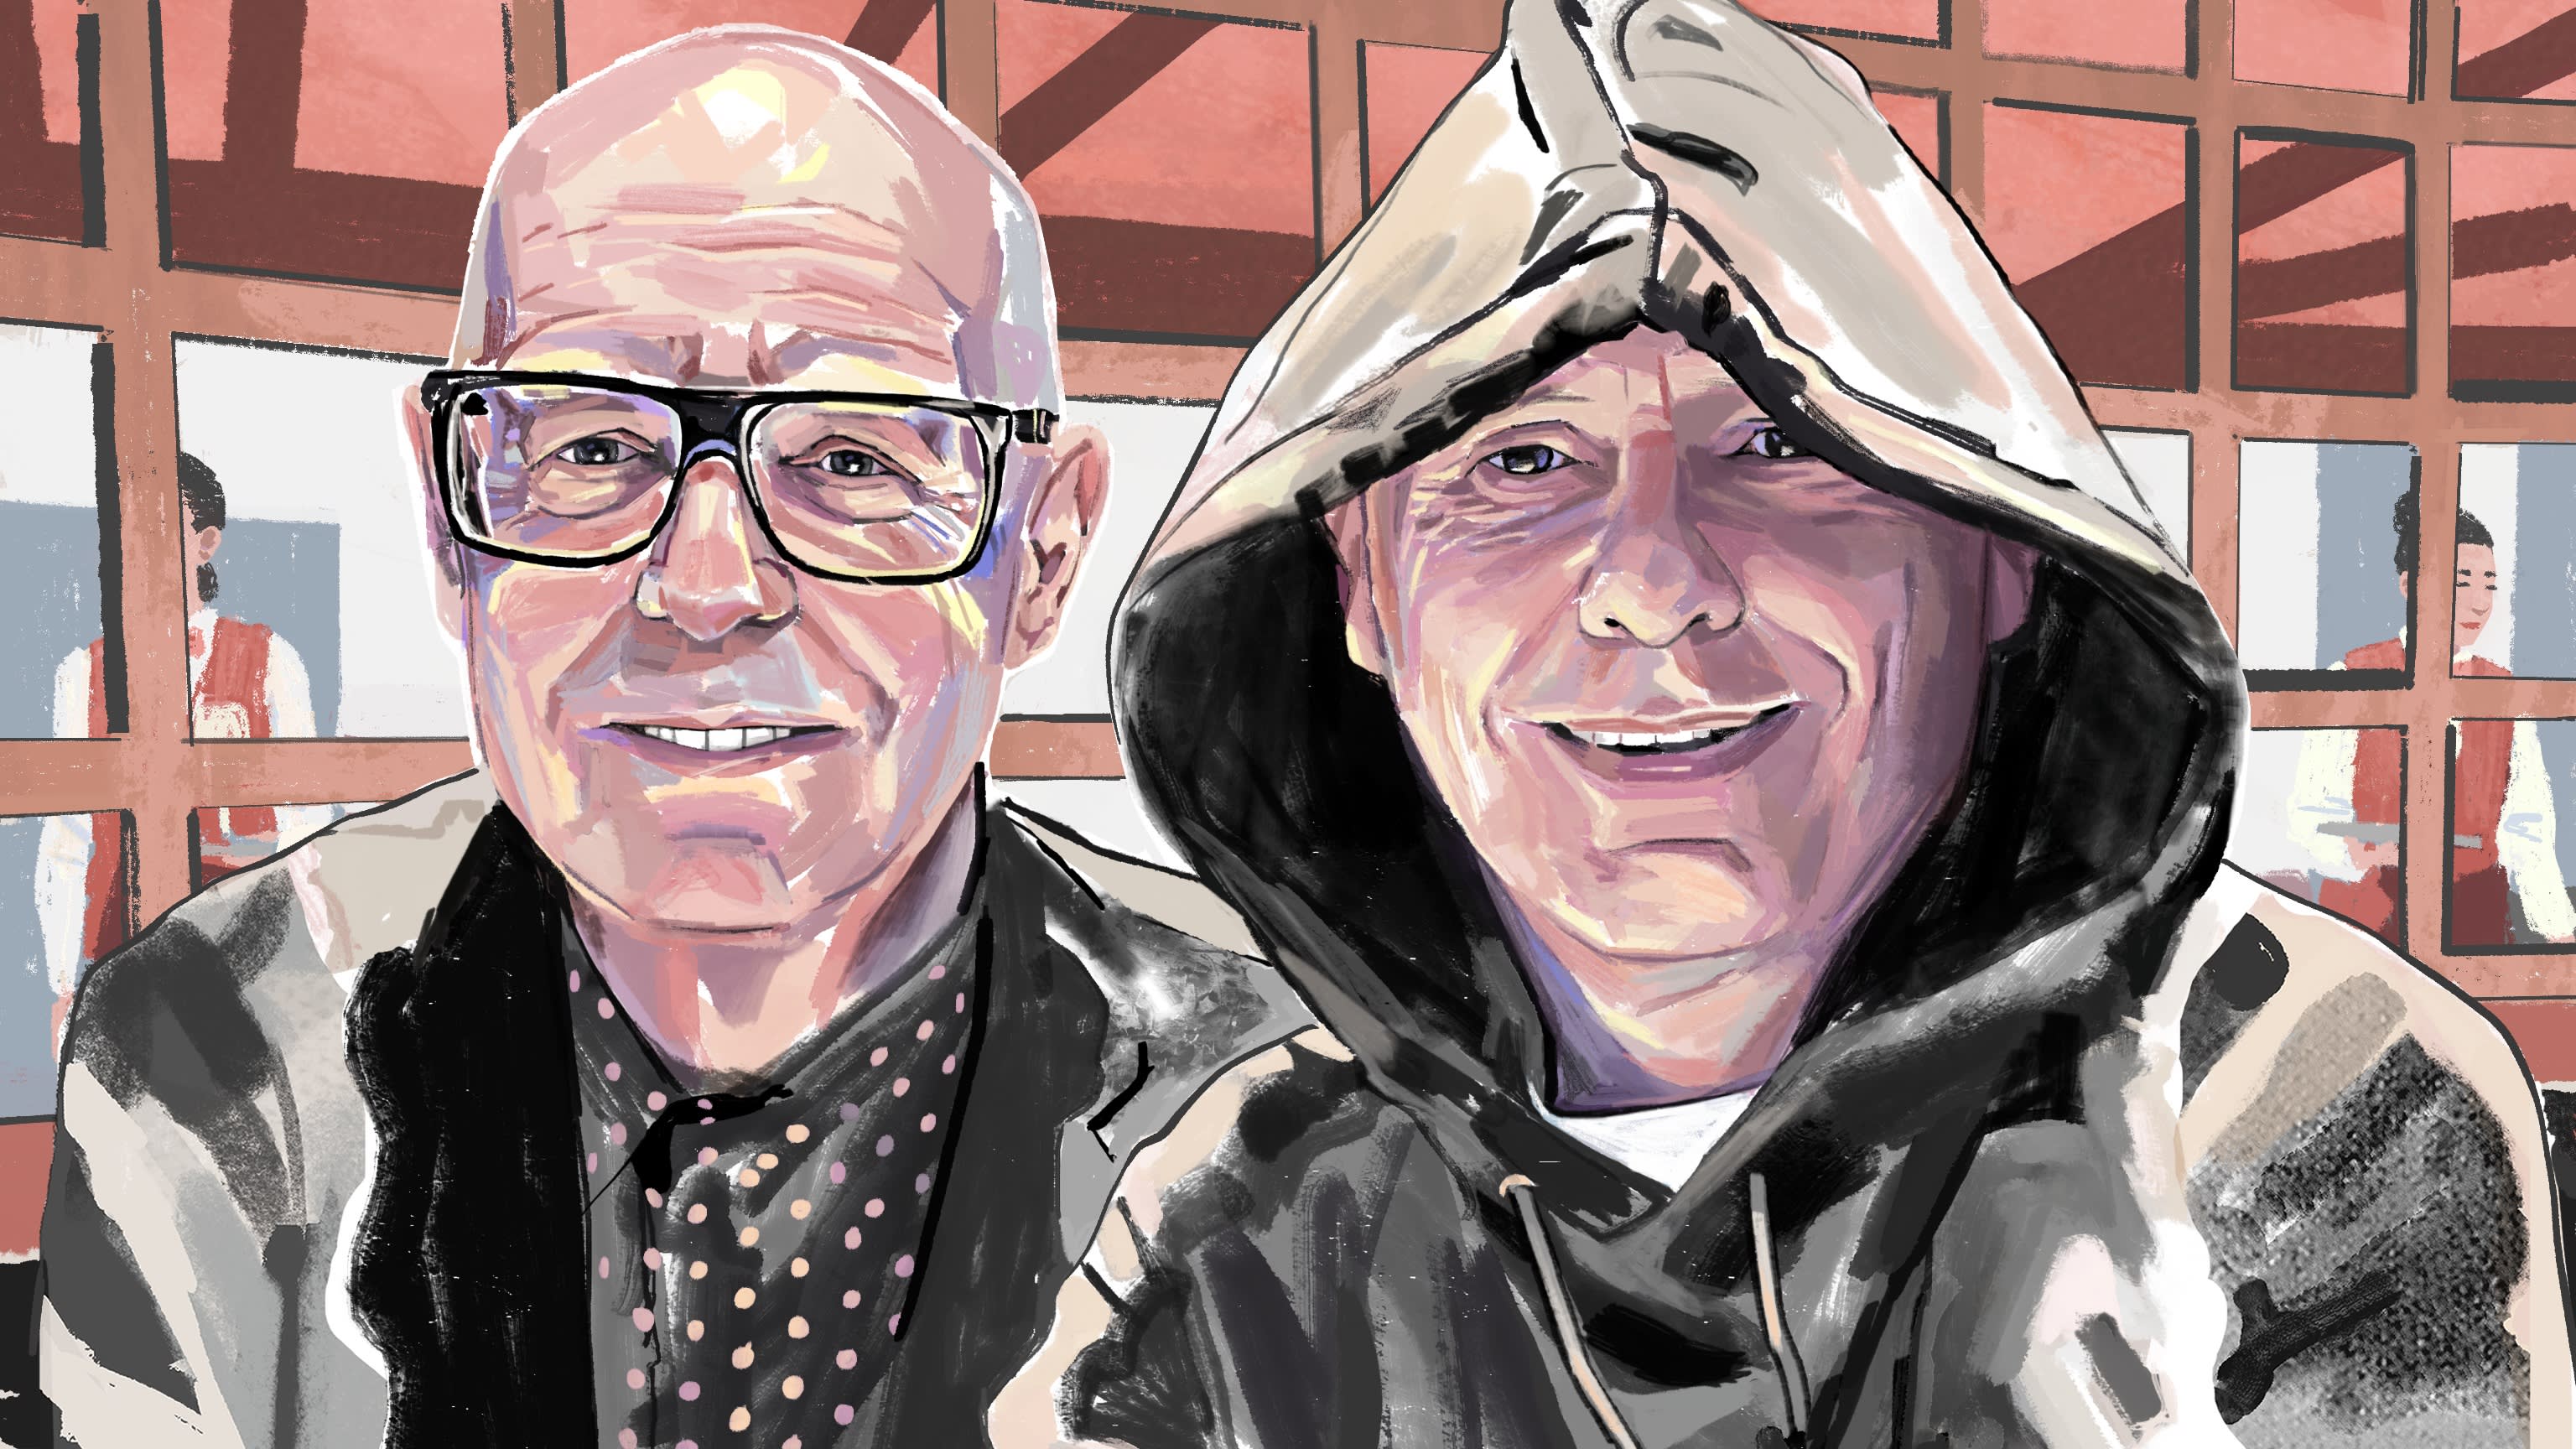 An illustration of two smiling men, one wearing glasses, one in a dark hoodie with the hood pulled up